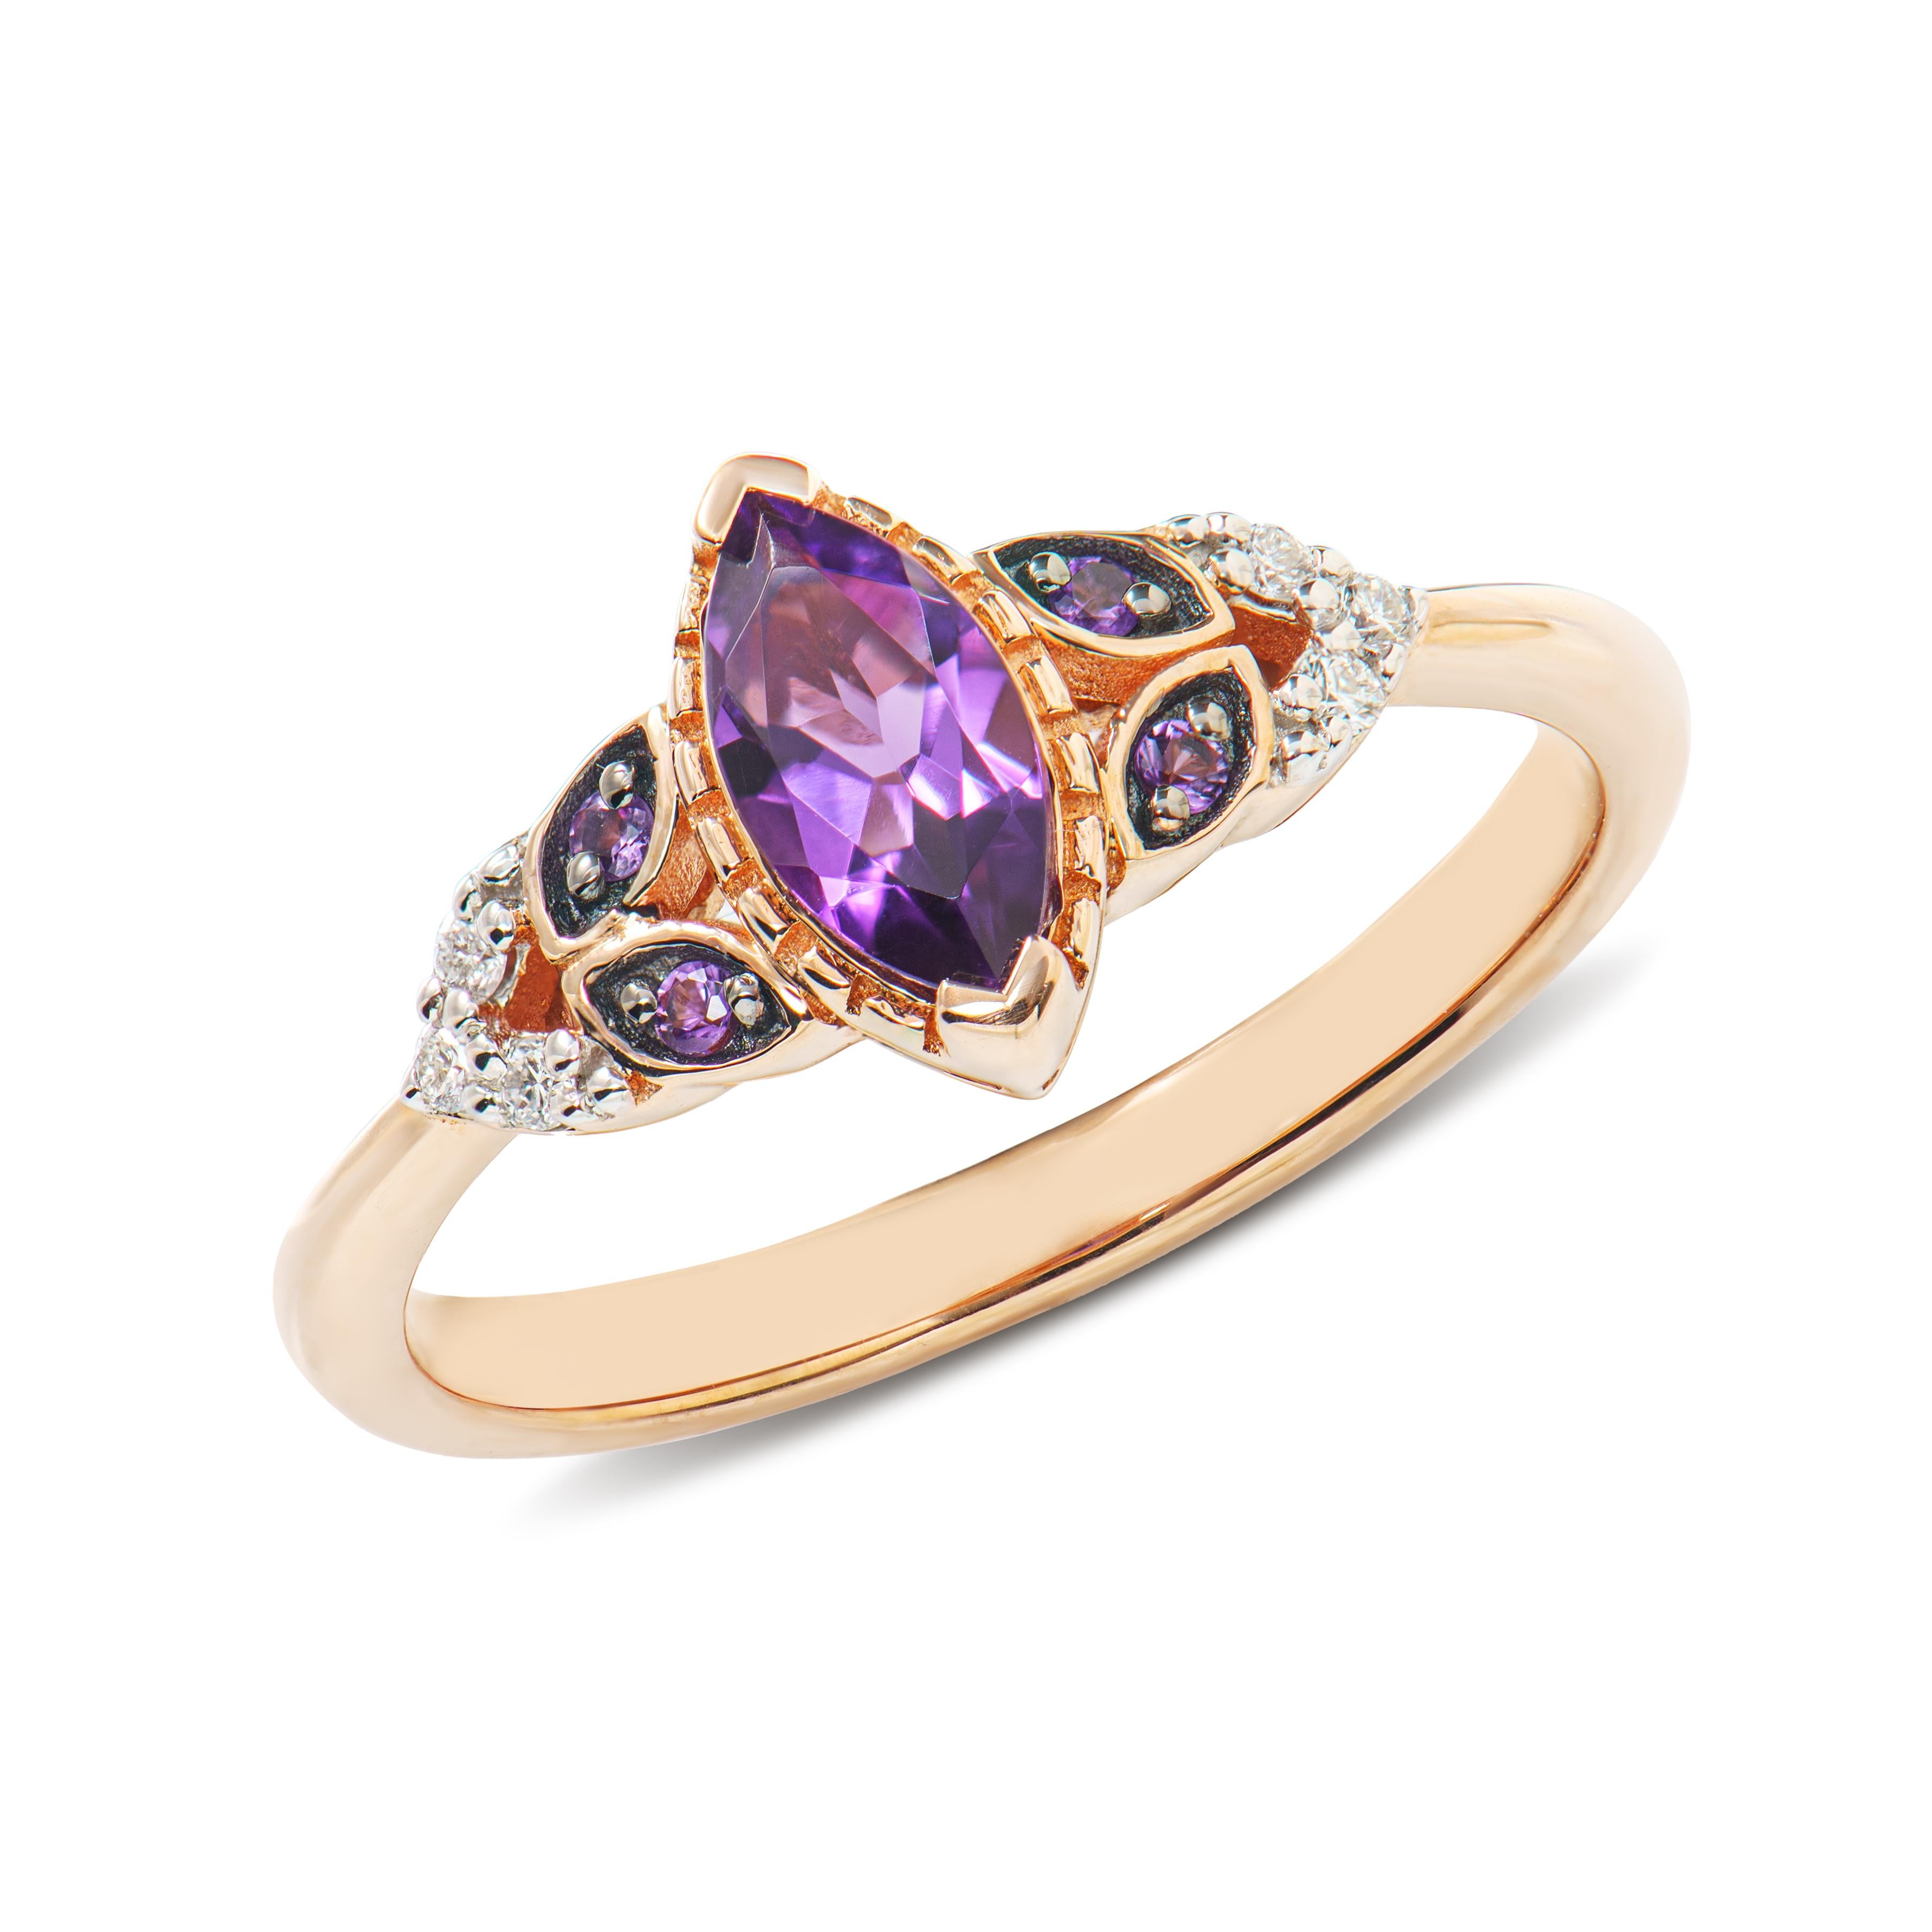 Presented A lovely set of Amethyst for people who value quality and want to wear it to any occasion or celebration. The rose gold Amethyst Fancy Ring adorned with diamonds offer a classic yet elegant appearance.
  
Amethyst Fancy Ring in 14Karat